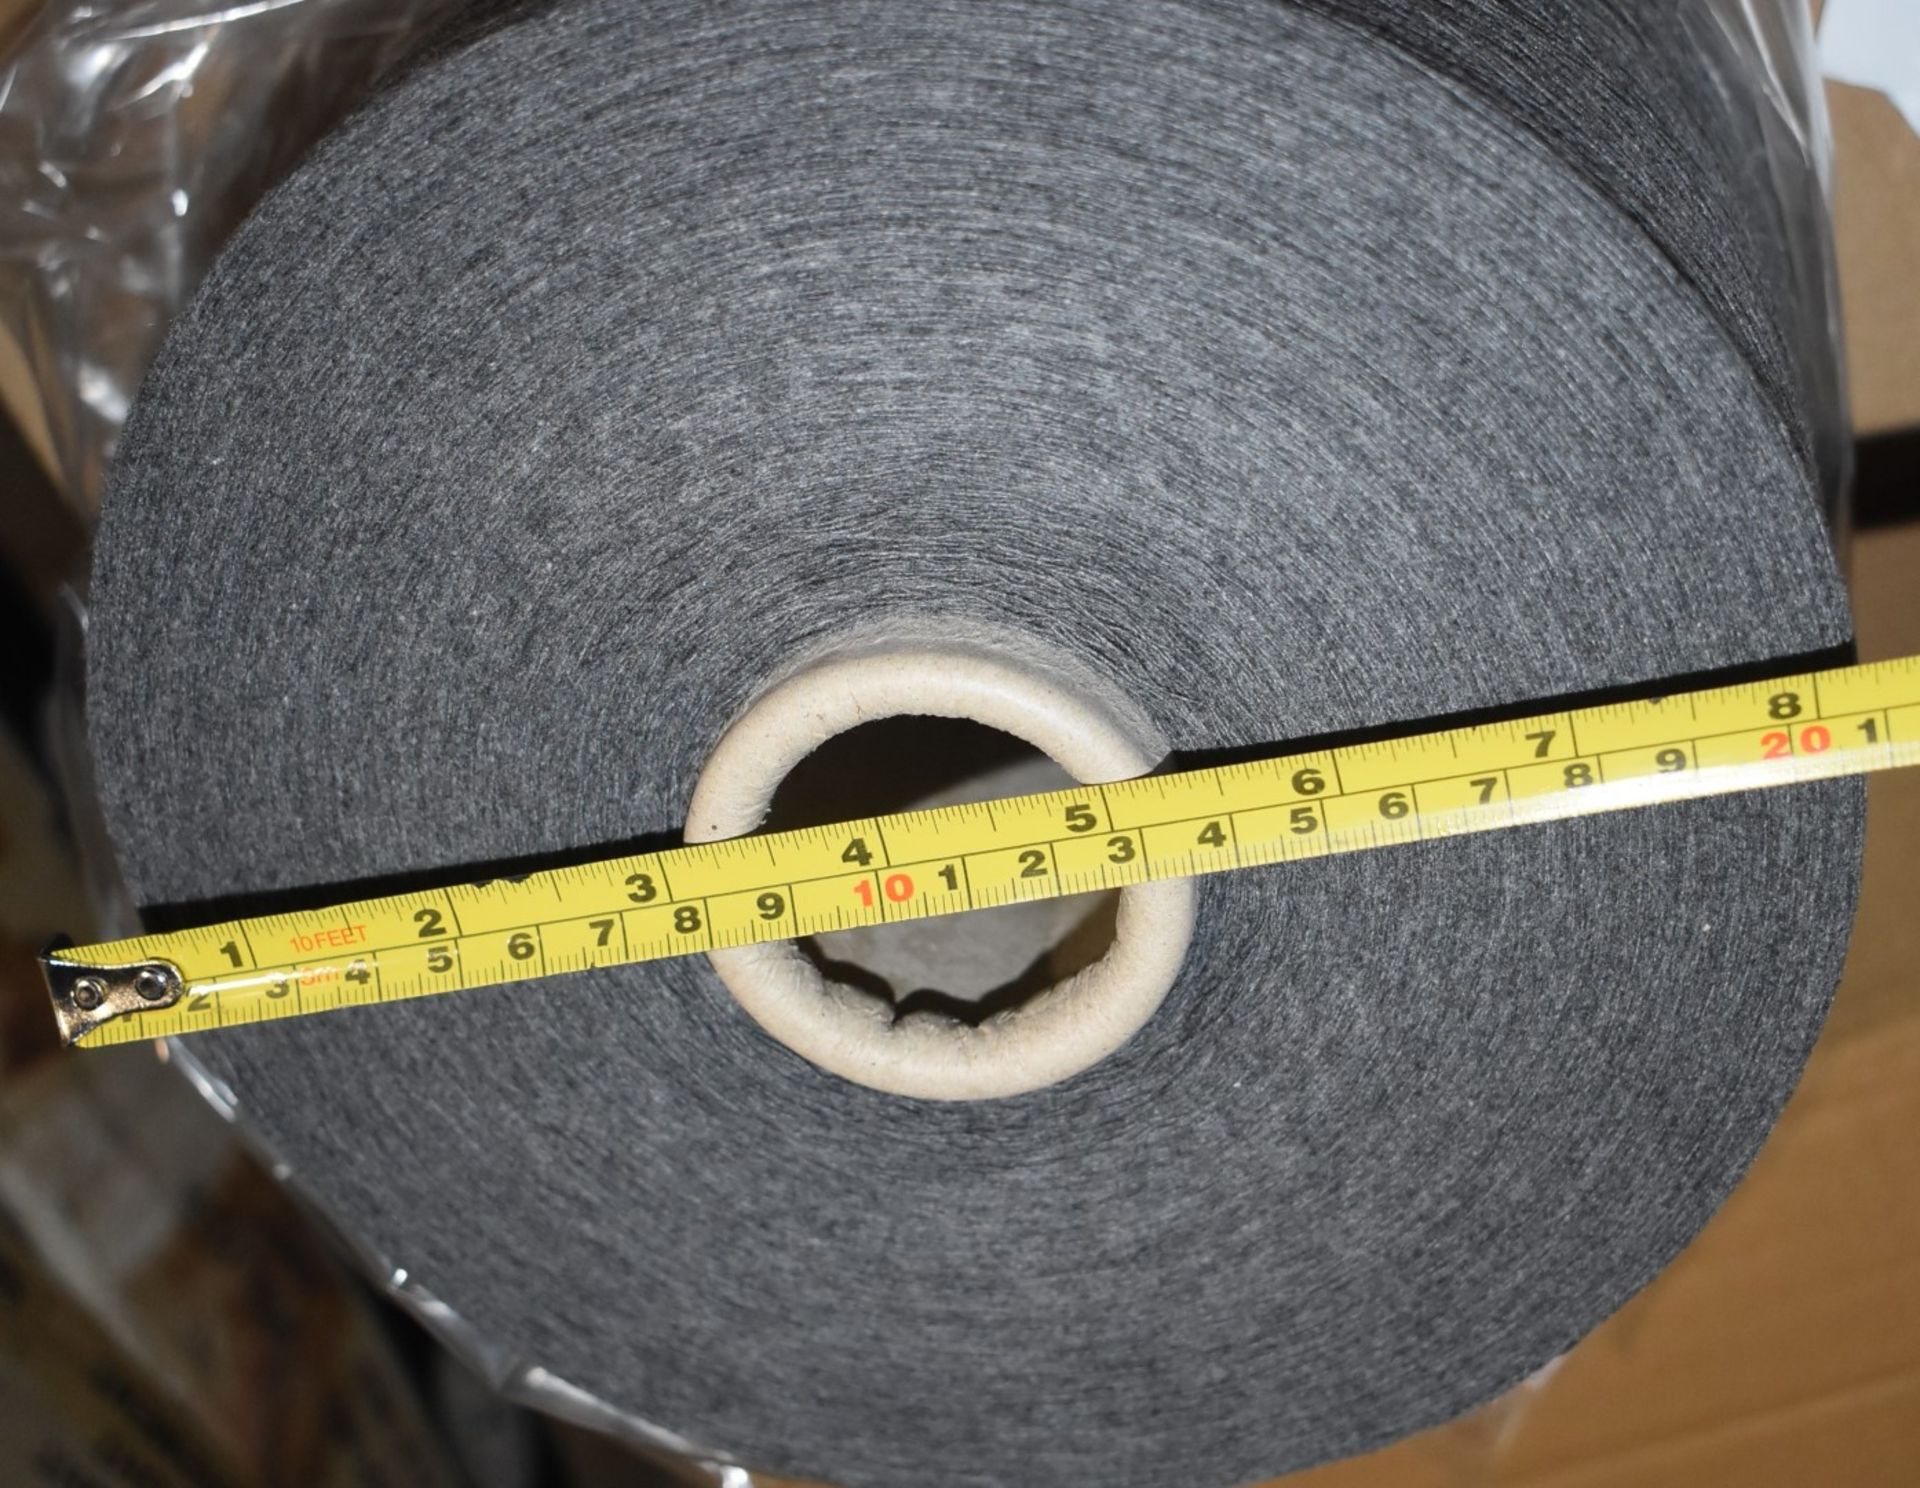 1 x Cone of 1/13 MicroCotton Knitting Yarn - Mid Grey - Approx Weight: 2,500g - New Stock ABL Yarn - Image 13 of 18